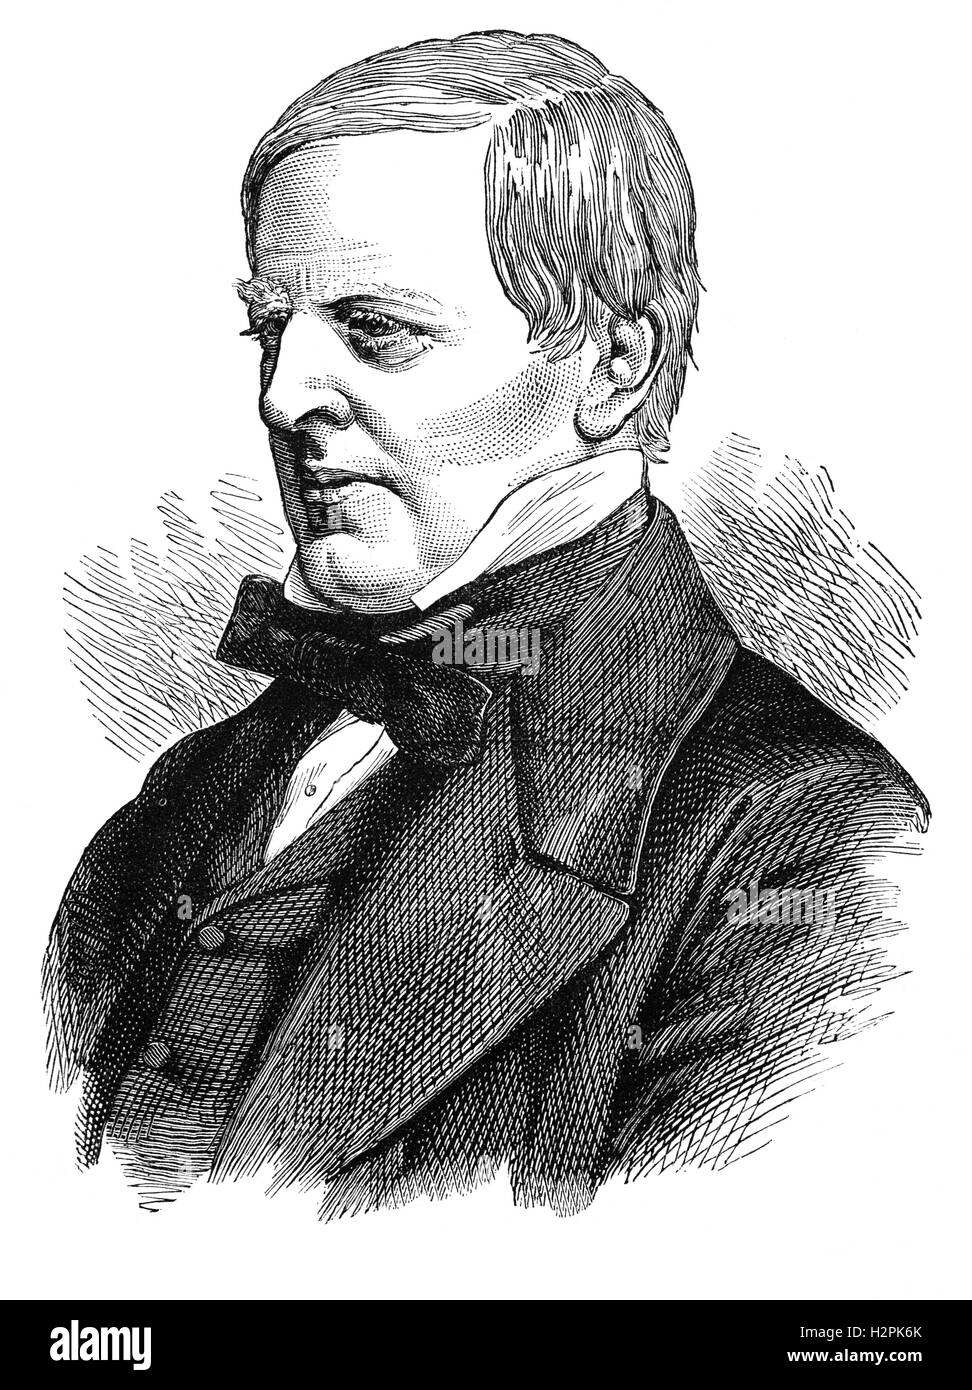 Robert Lowe, 1st Viscount Sherbrooke (1811 – 1892 British statesman, was a pivotal figure remembered for his work in education, opposition to electoral reform and his contribution to modern UK company law.  He held office under Gladstone as Chancellor of the Exchequer between 1868 and 1873 and as Home Secretary between 1873 and 1874. Stock Photo